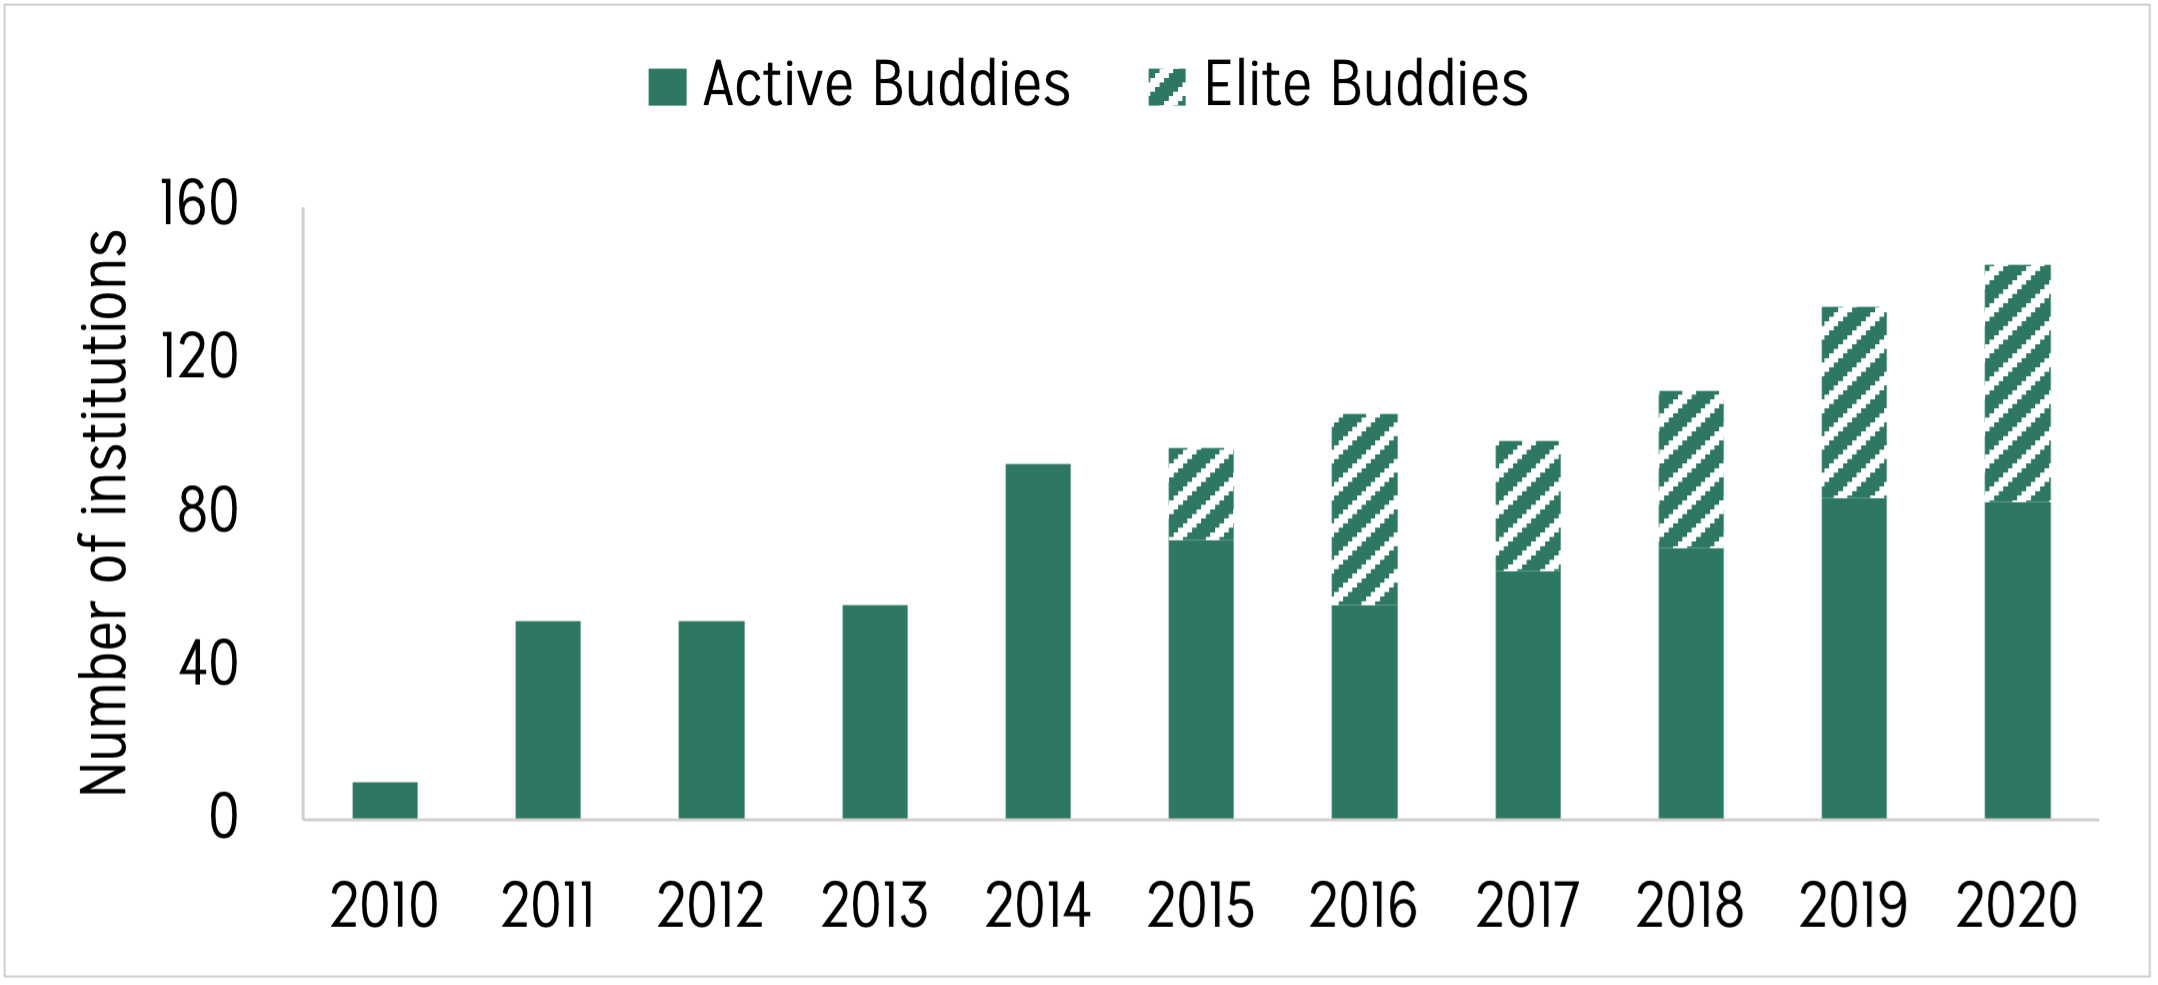 Bar chart displaying the total number of active buddies and elite buddies from 2010 to 2020